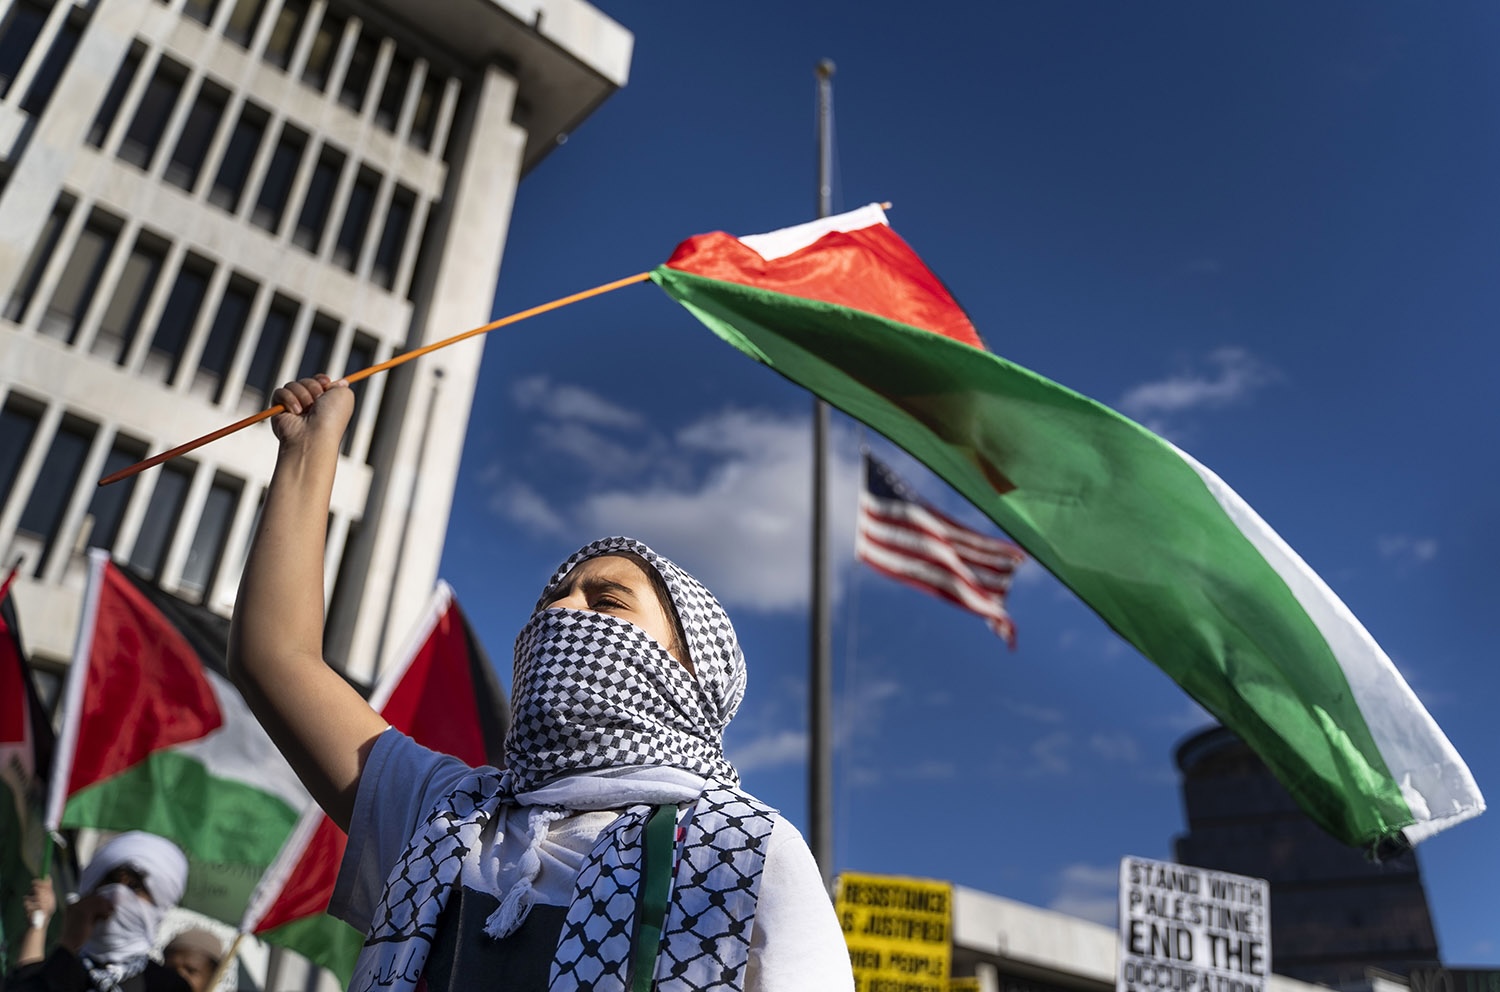 a color photograph of a protestor with their head wrapped and face covered in checkered cloth holding a Palestinian flag on a stick overhead with the US flag in the background.